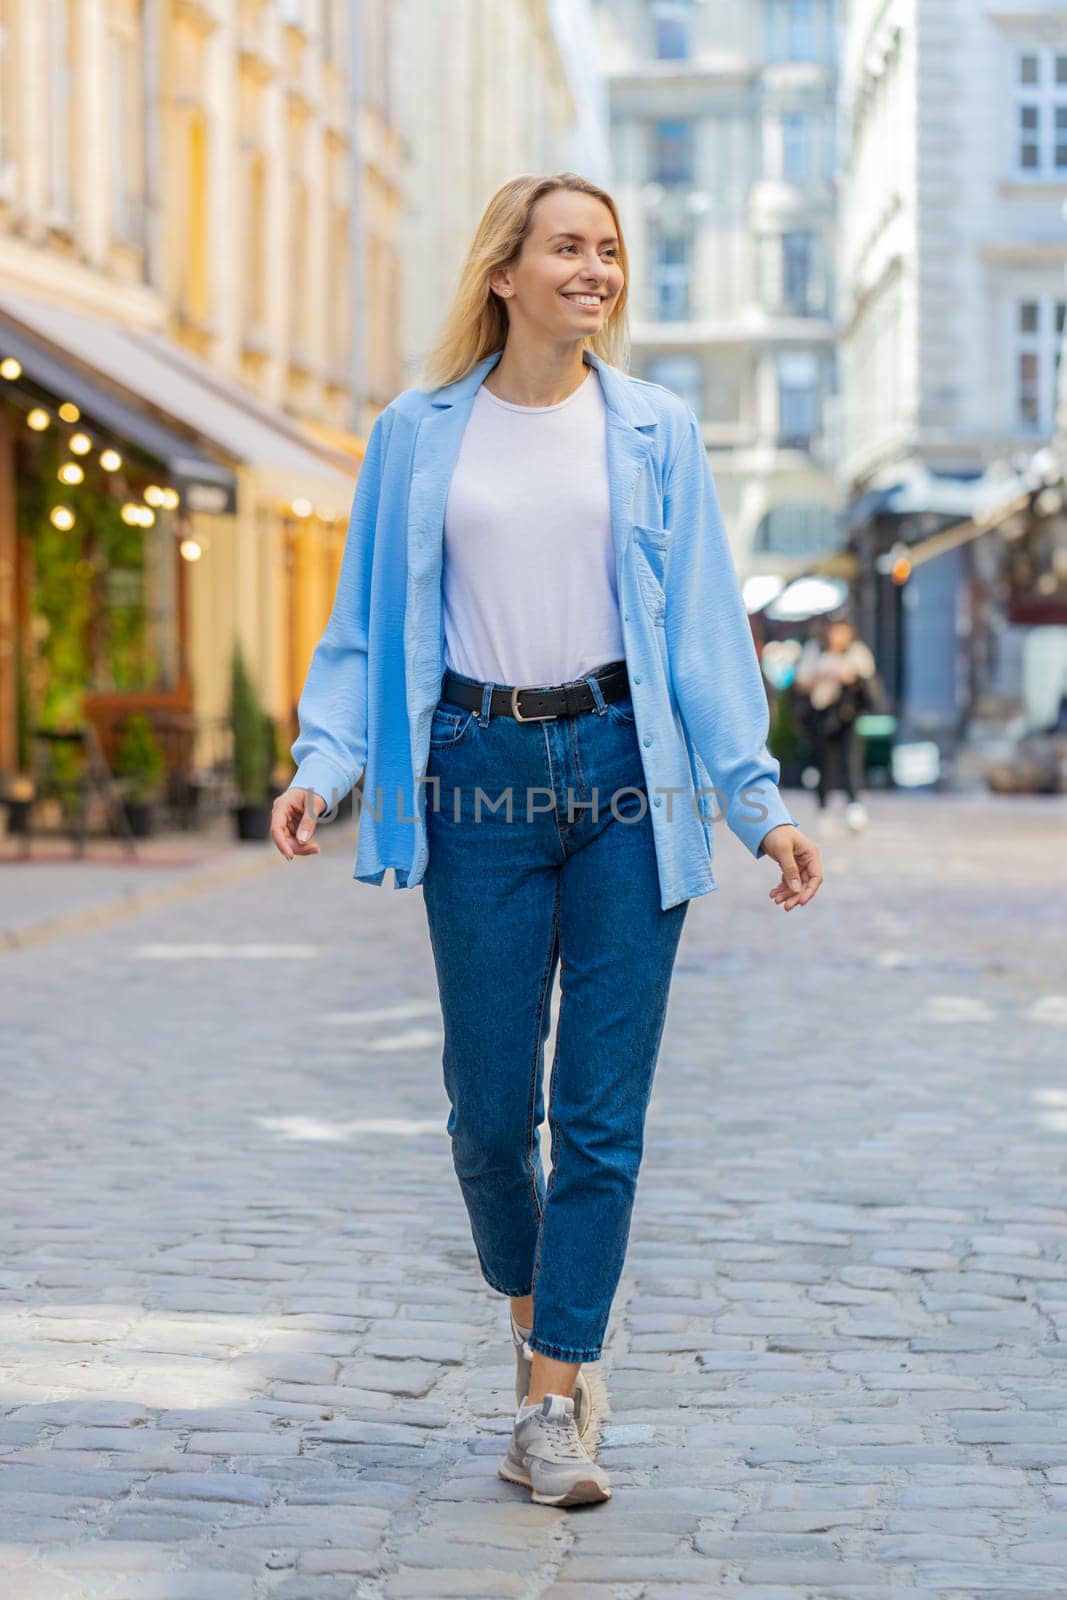 Portrait of young blonde tourist woman walking on urban city street outdoors. Smiling happy lady girl traveler having positive good mood enjoying in summer daytime. Town lifestyles, vacation holidays